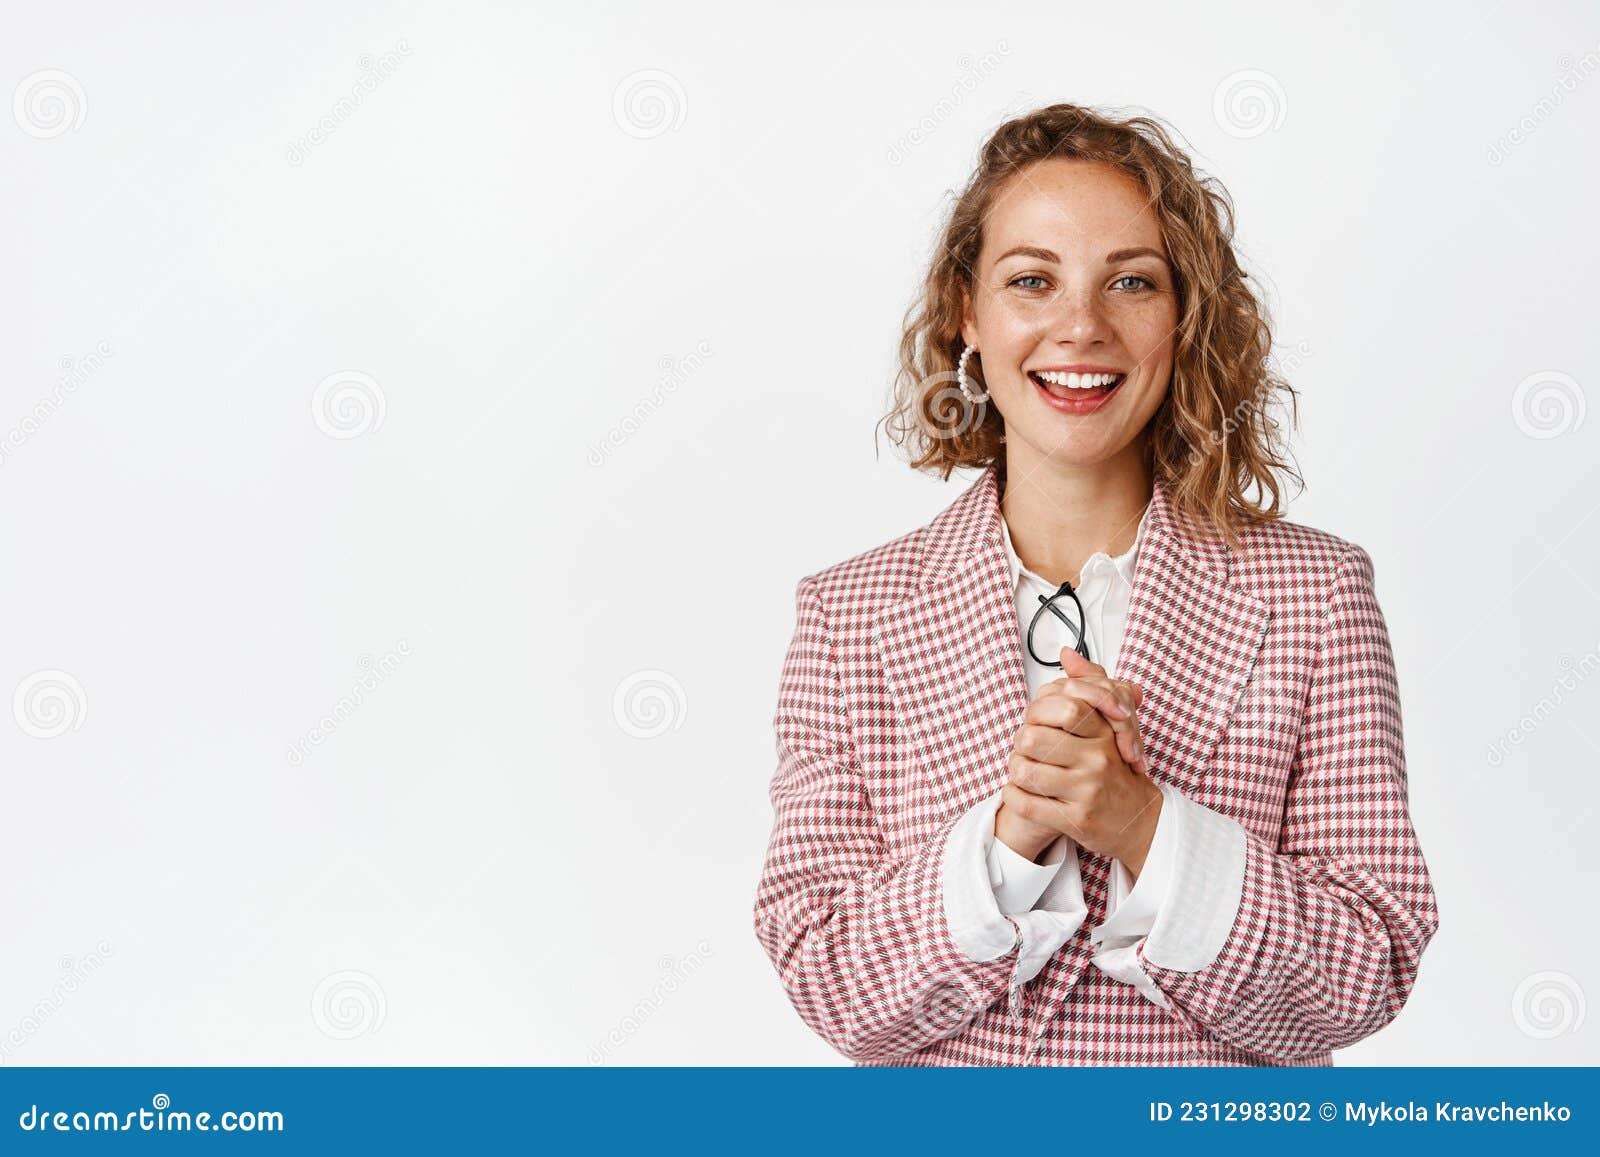 young businesswoman clench hands, looking with hopeful face expression, smiling and looking at camera with anticipation